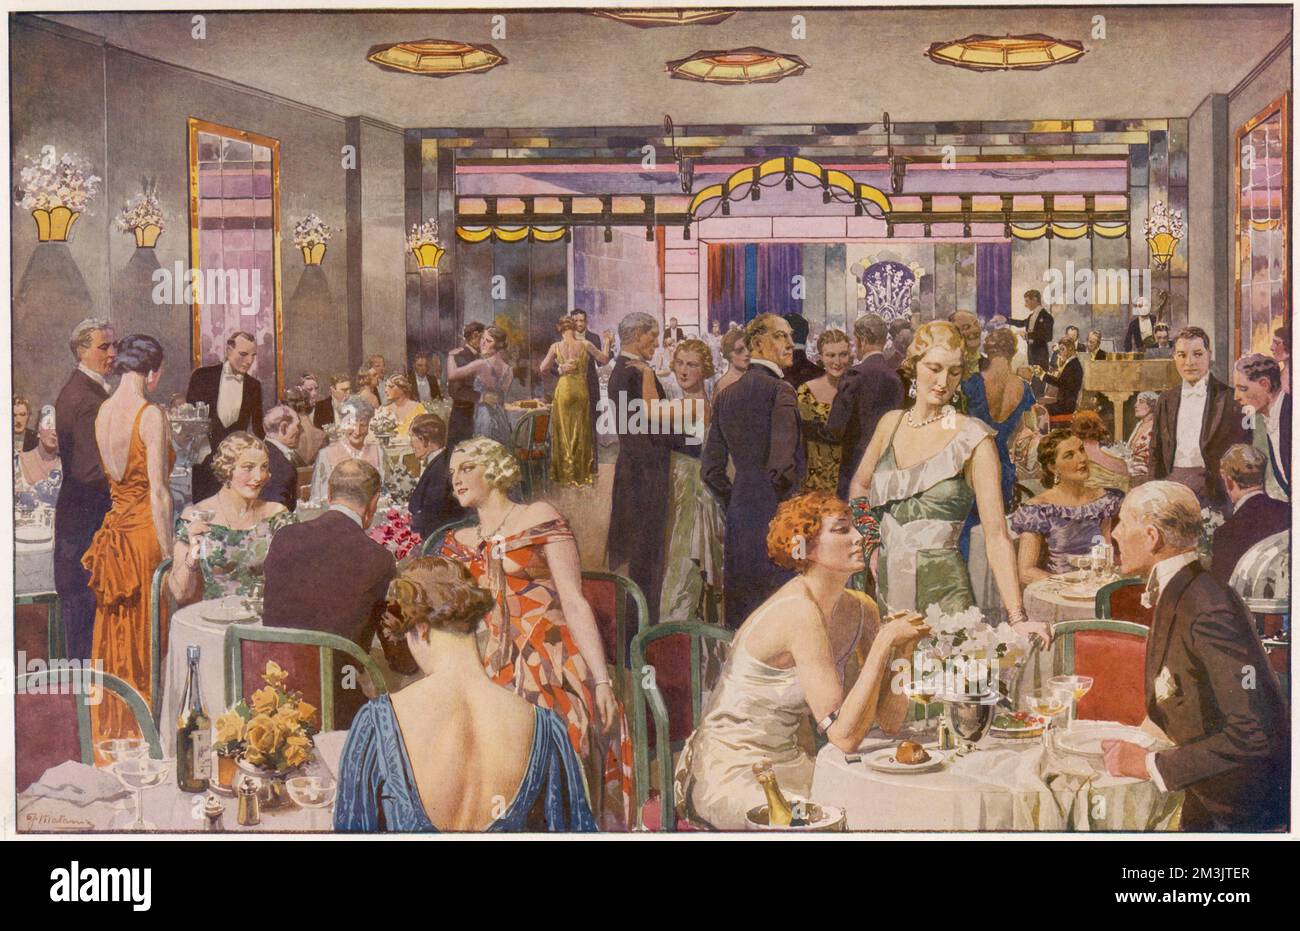 Scene at Quaglino's restaurant in Bury Street from 1932 showing diners in evening dress, at tables, chatting or dancing.  Originally established in 1929, Quaglino's was the most famous of London's 'society' restaurants.     Date: 1932 Stock Photo